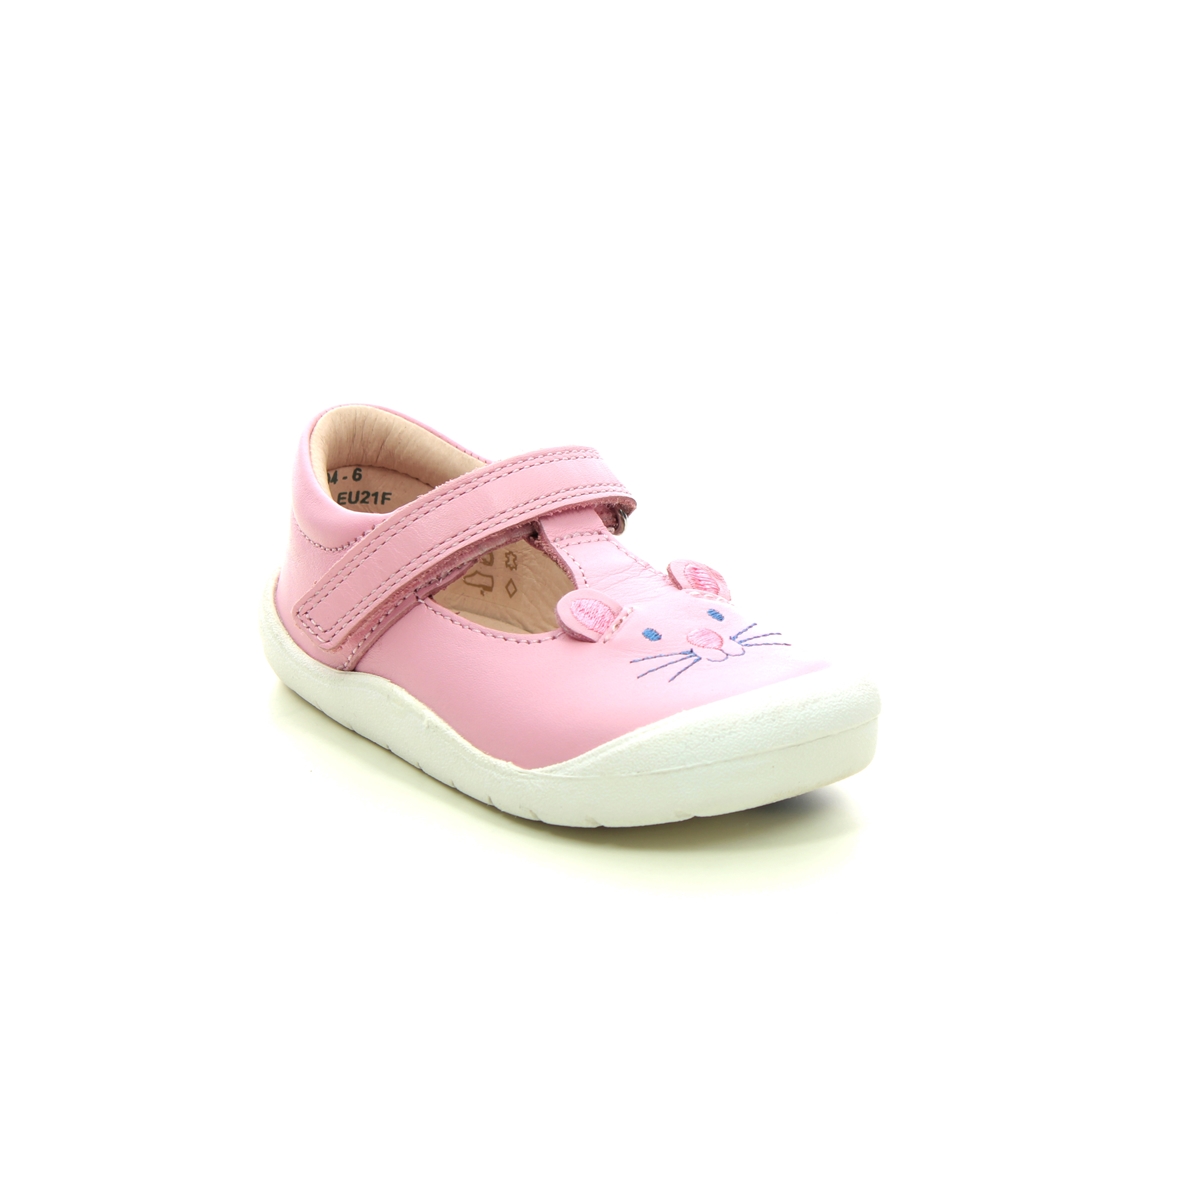 Start Rite Buddy T Bar Pink Leather Kids girls first and baby shoes 0794-66F in a Plain Leather in Size 5.5